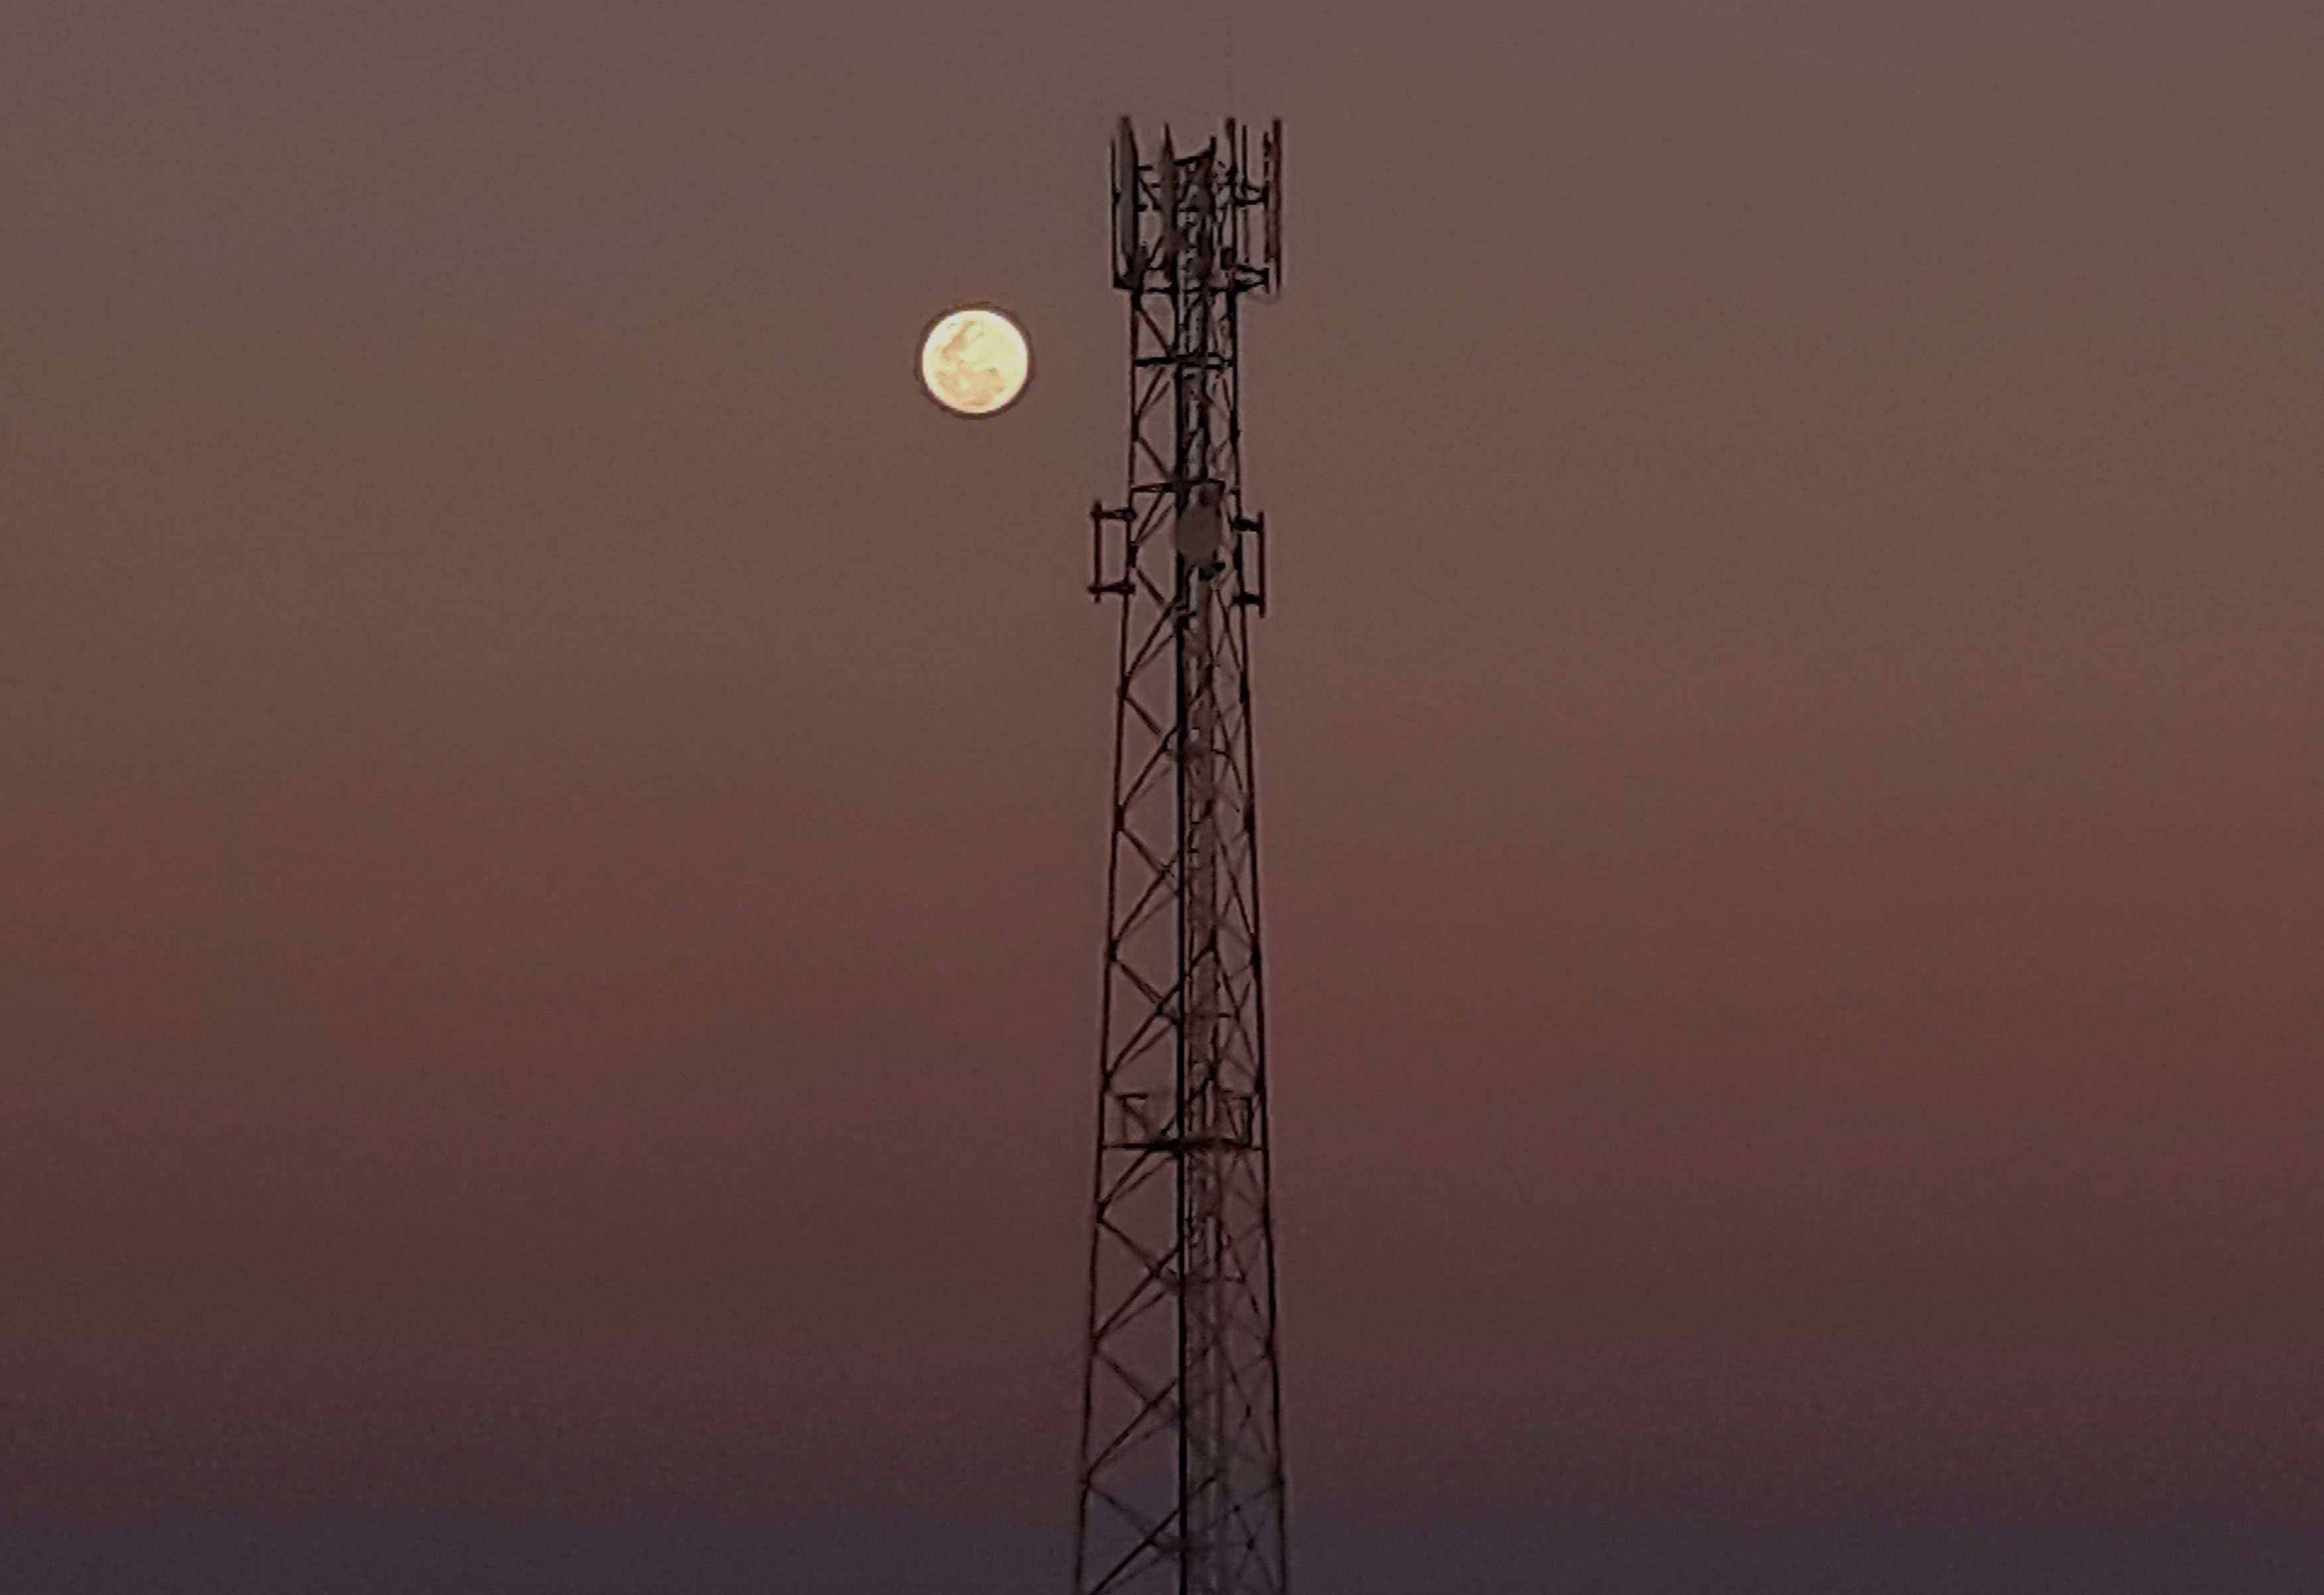 NLEX. Worm moon rising as seen from Manila's North Luzon Expressway. Photo by Mau Victa/Rappler  